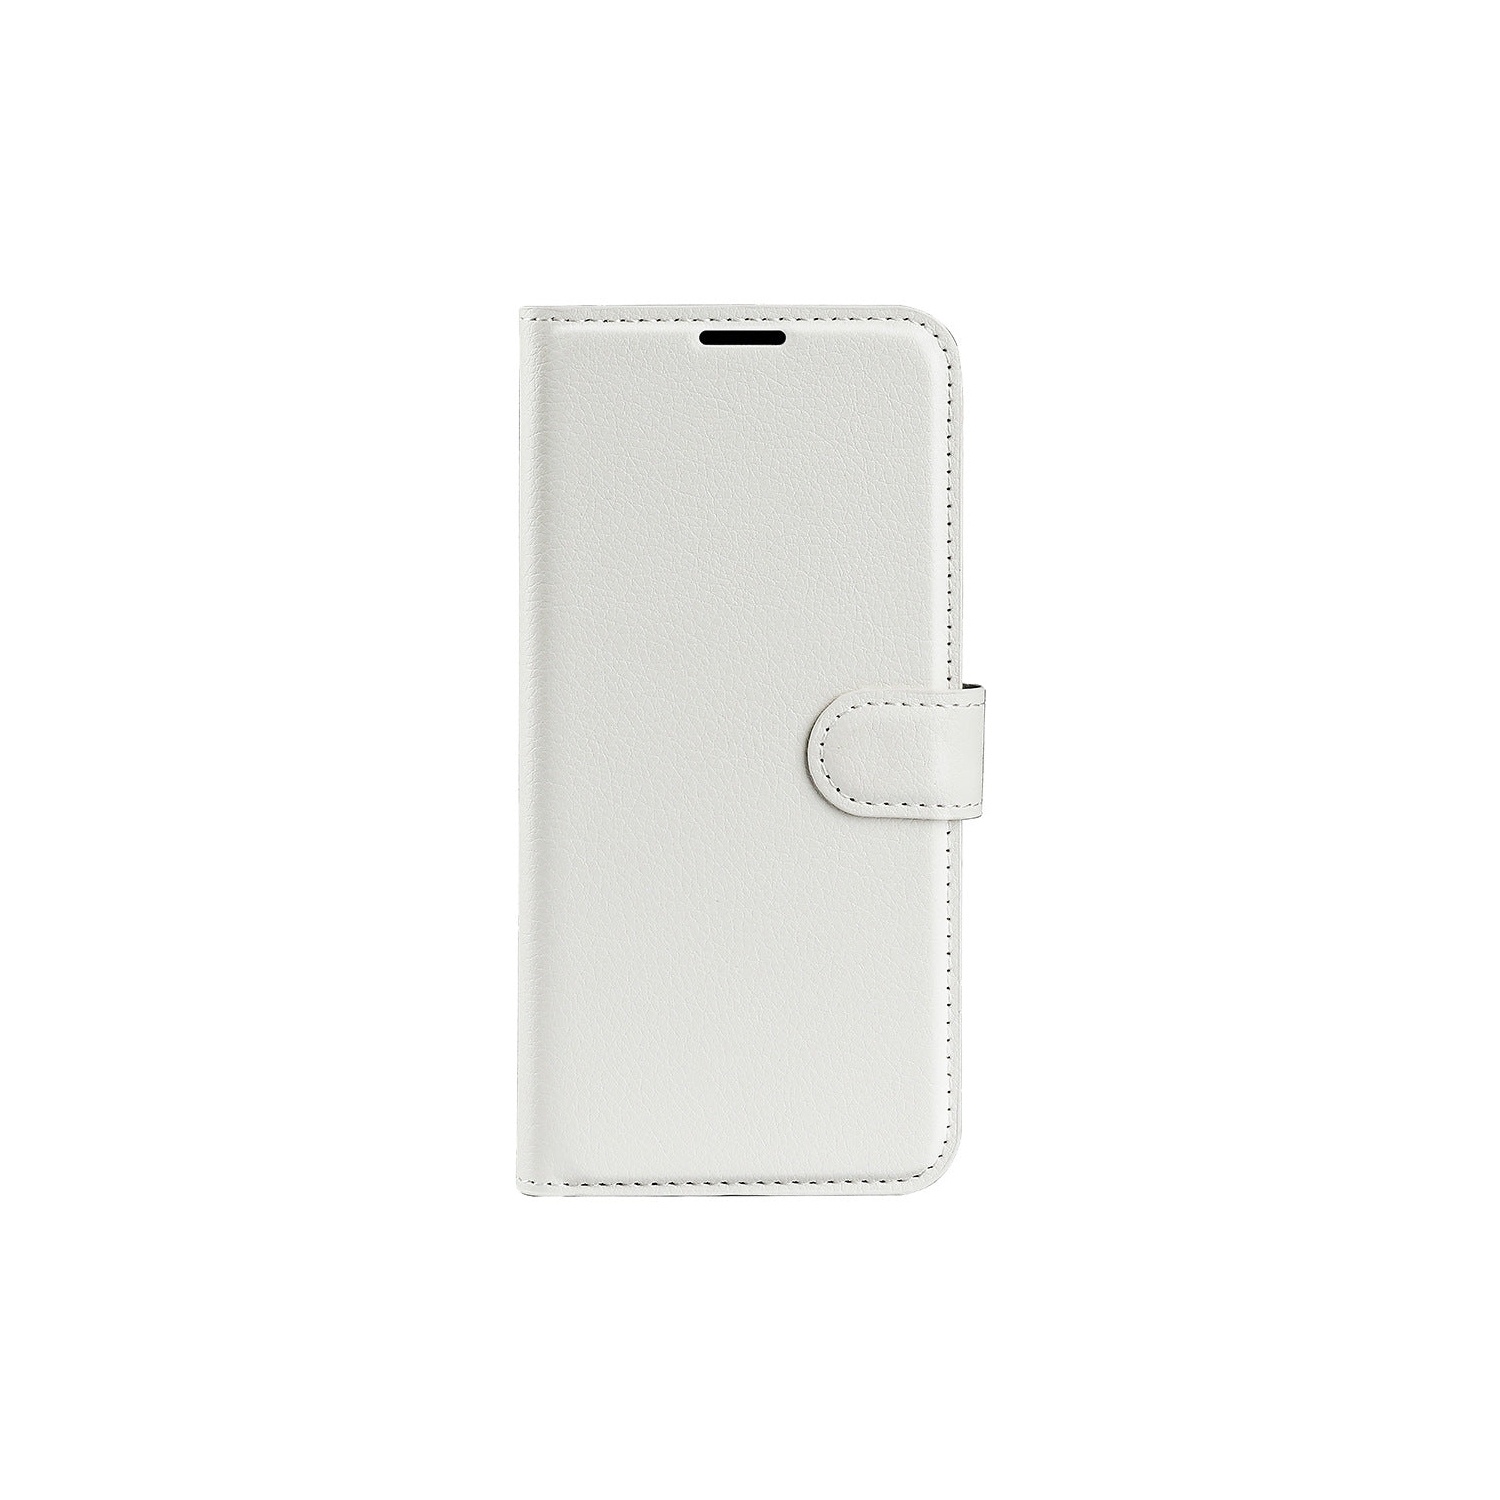 PANDACO White Leather Wallet Case for Google Pixel 6 Pro